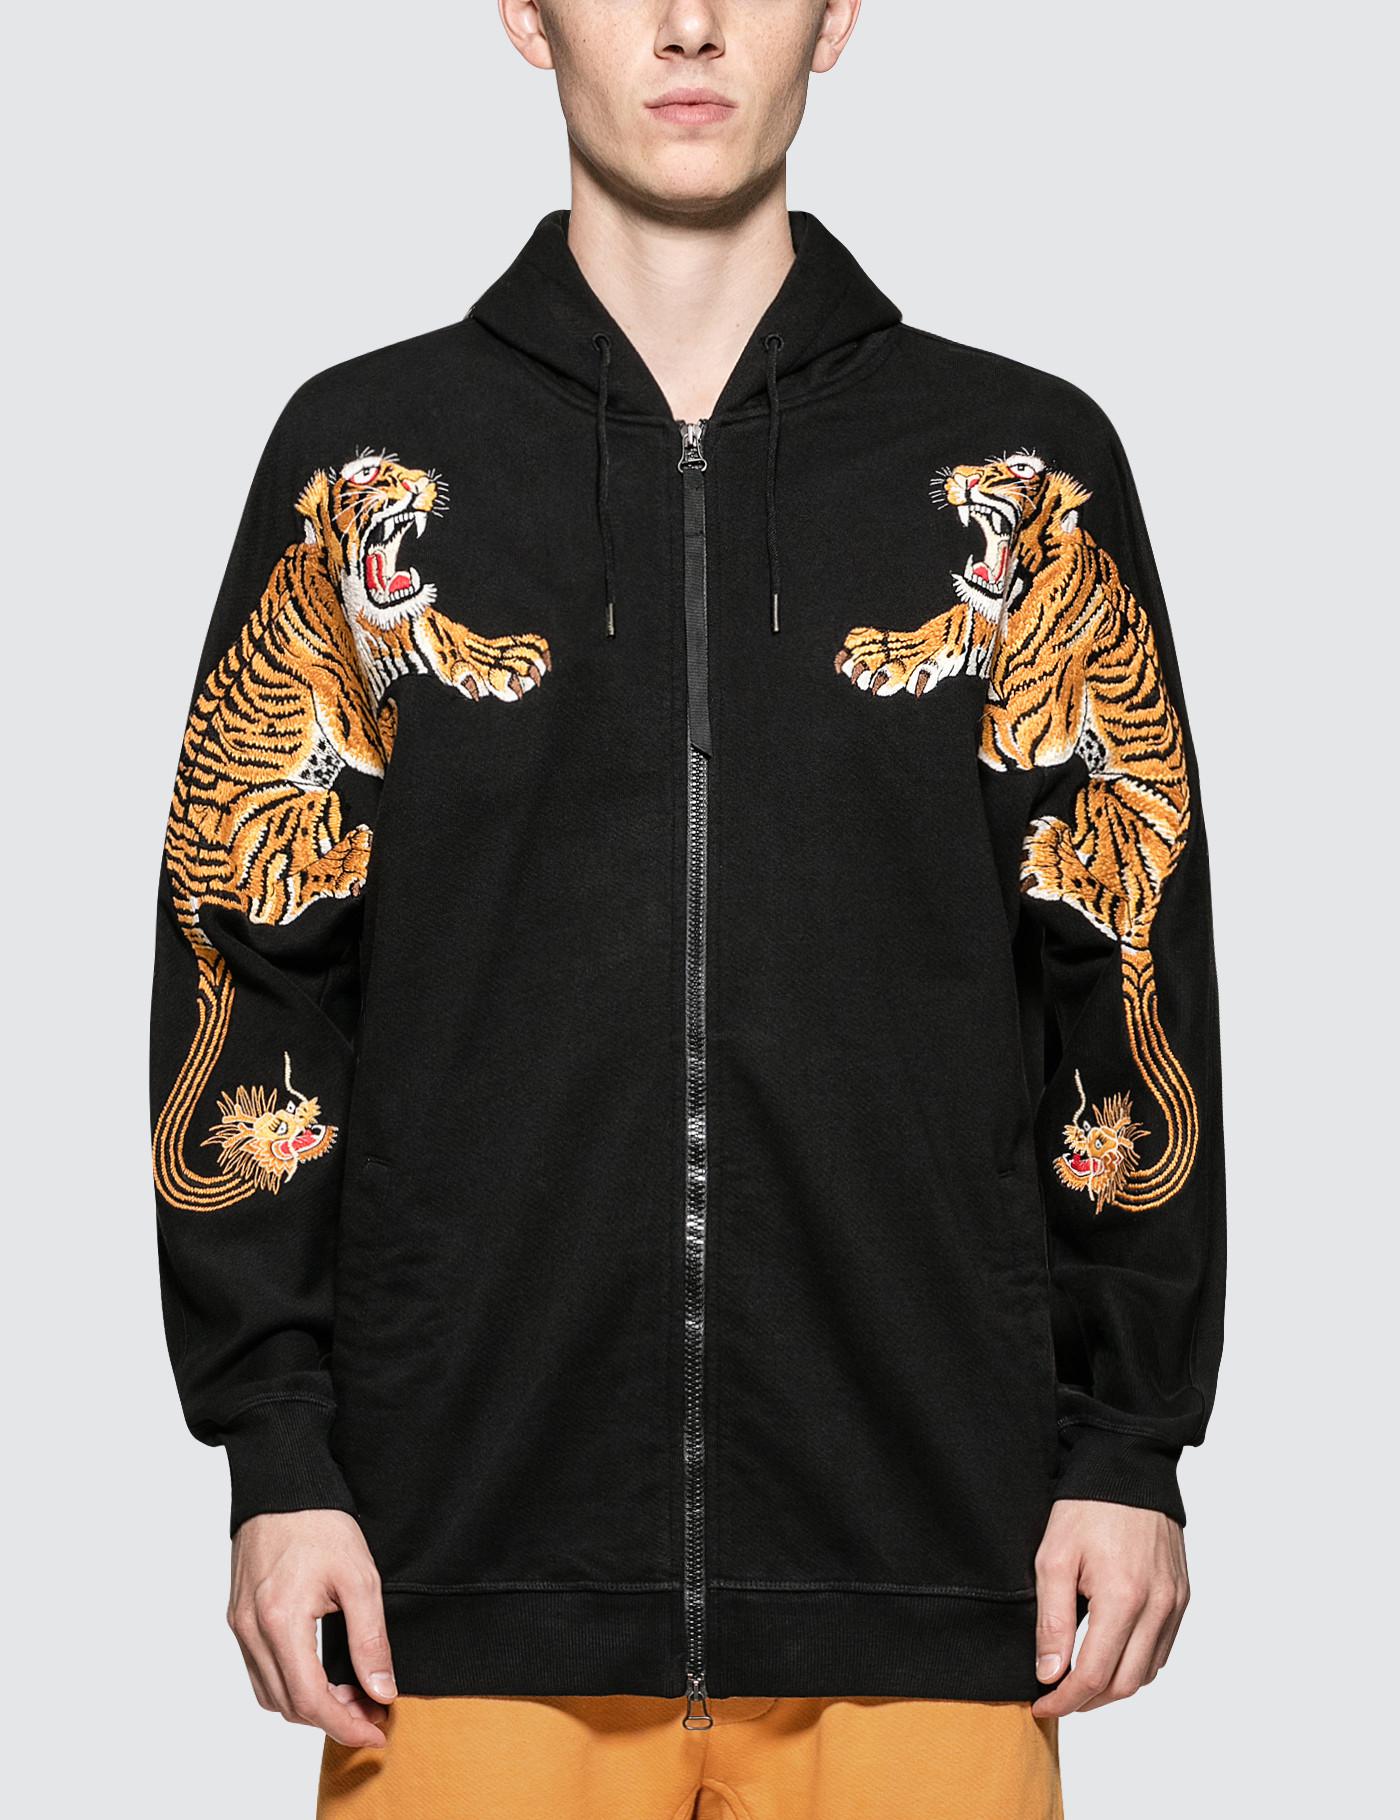 Maharishi Cotton Tiger Style Zipped Hoodie in Black for Men - Lyst